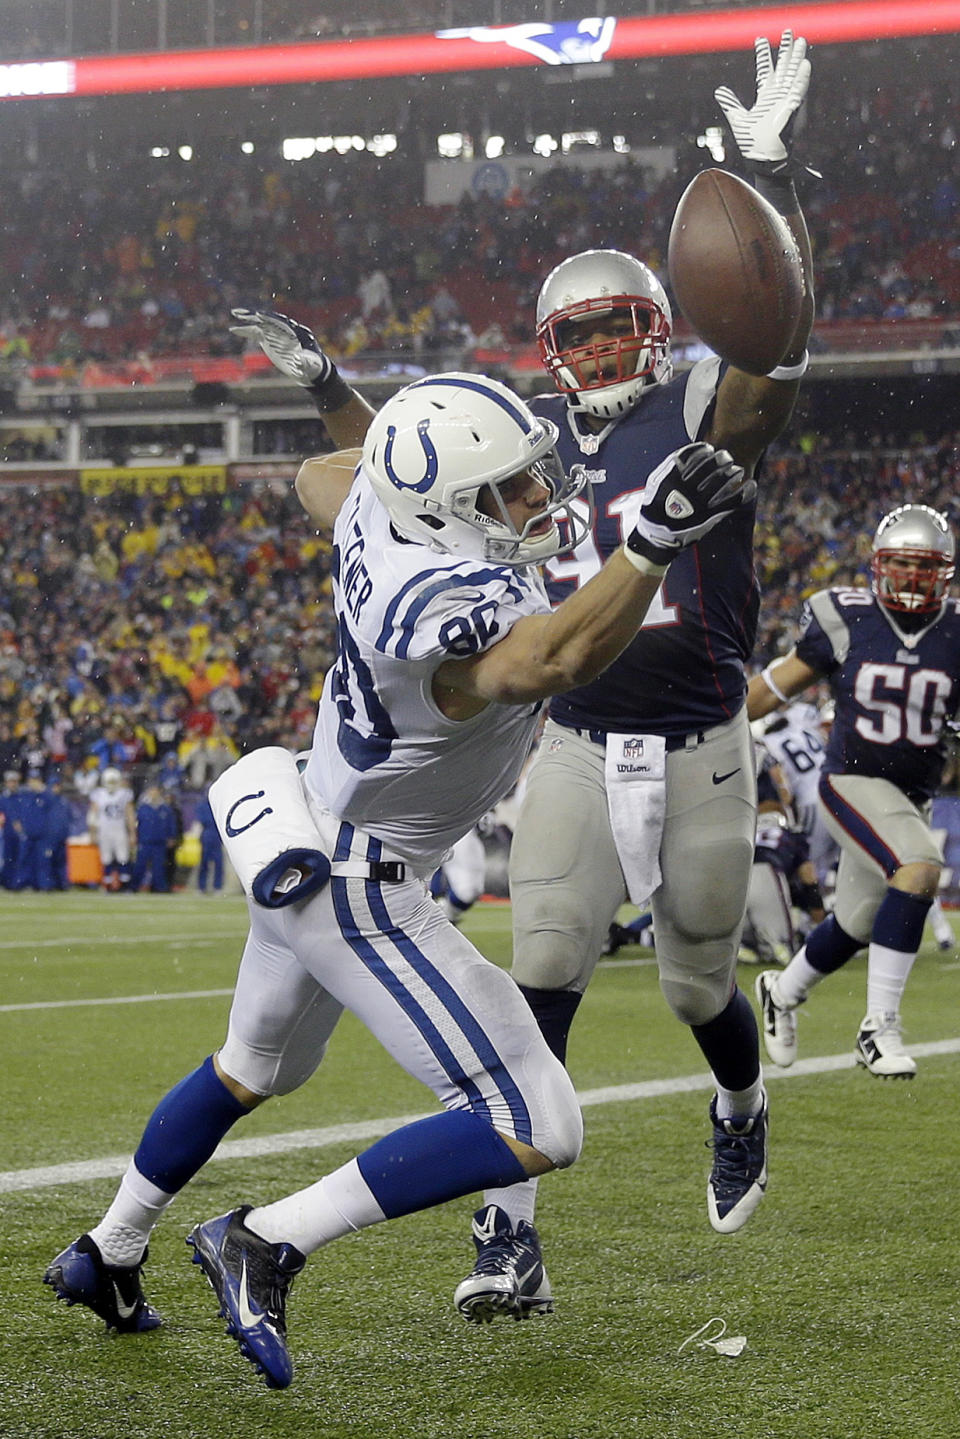 A pass gets away from Indianapolis Colts tight end Coby Fleener (80) under pressure from New England Patriots linebacker Jamie Collins (91) during the second half of an AFC divisional NFL playoff football game in Foxborough, Mass., Saturday, Jan. 11, 2014. (AP Photo/Matt Slocum)